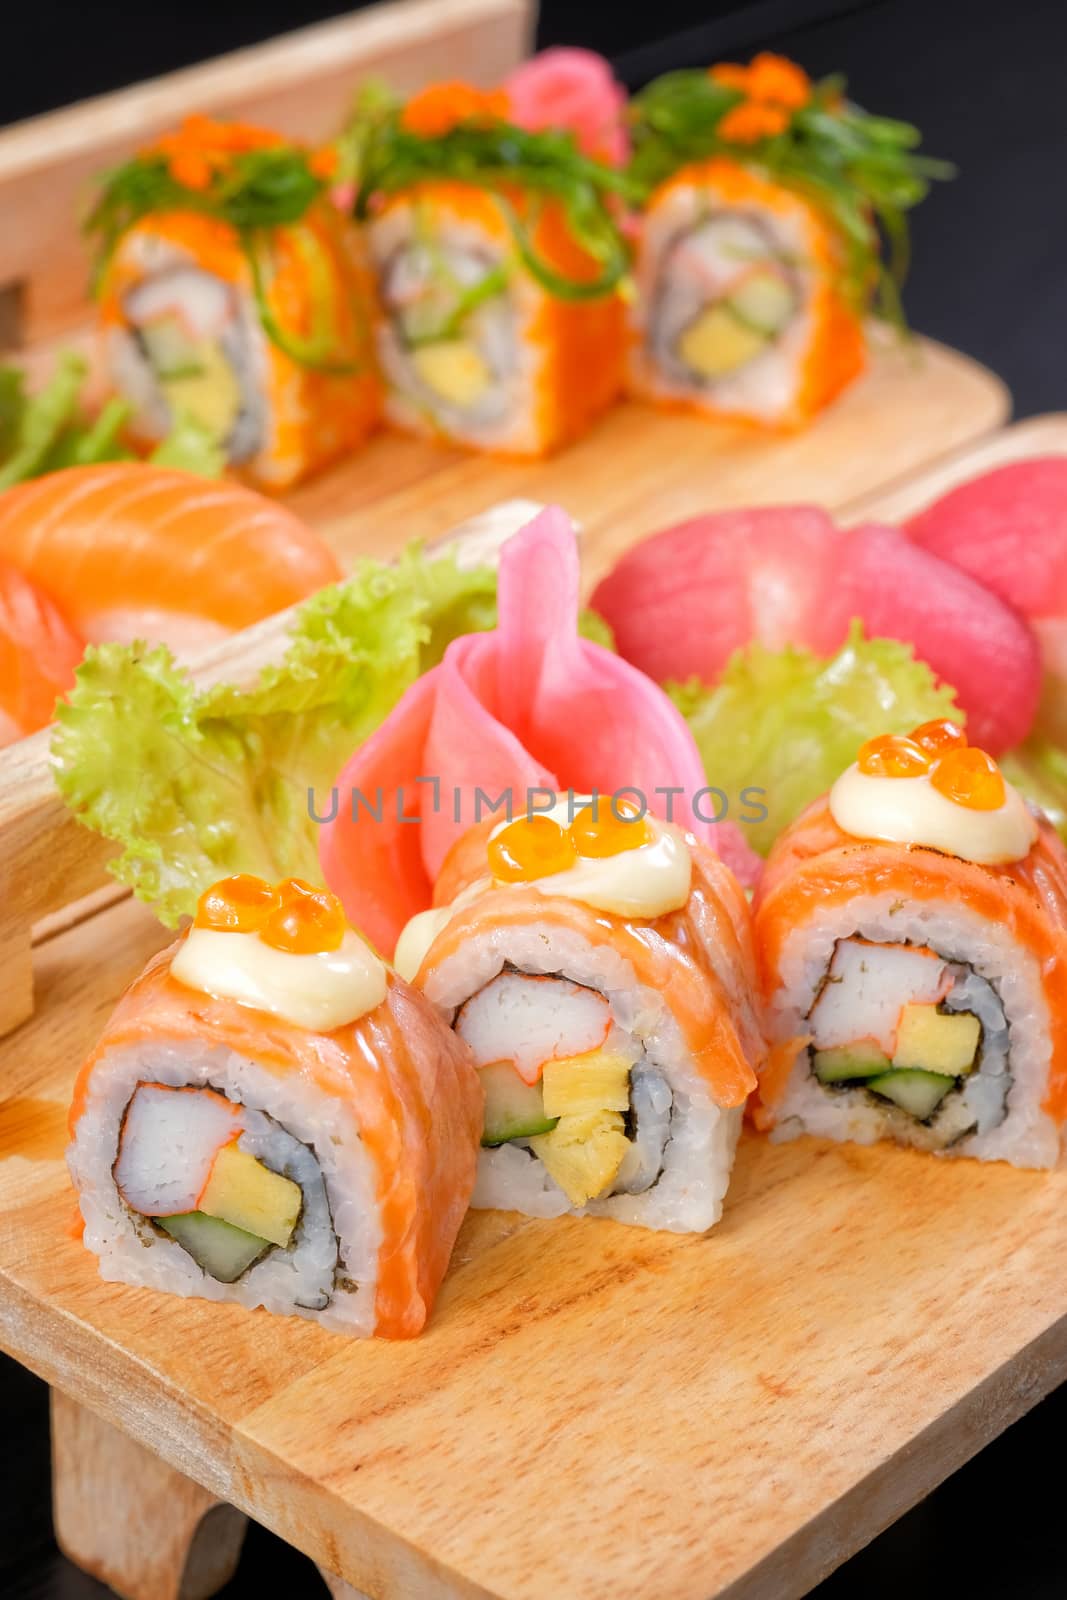 Japanese Cuisine - Sushi Roll on wood plate in black background by Surasak